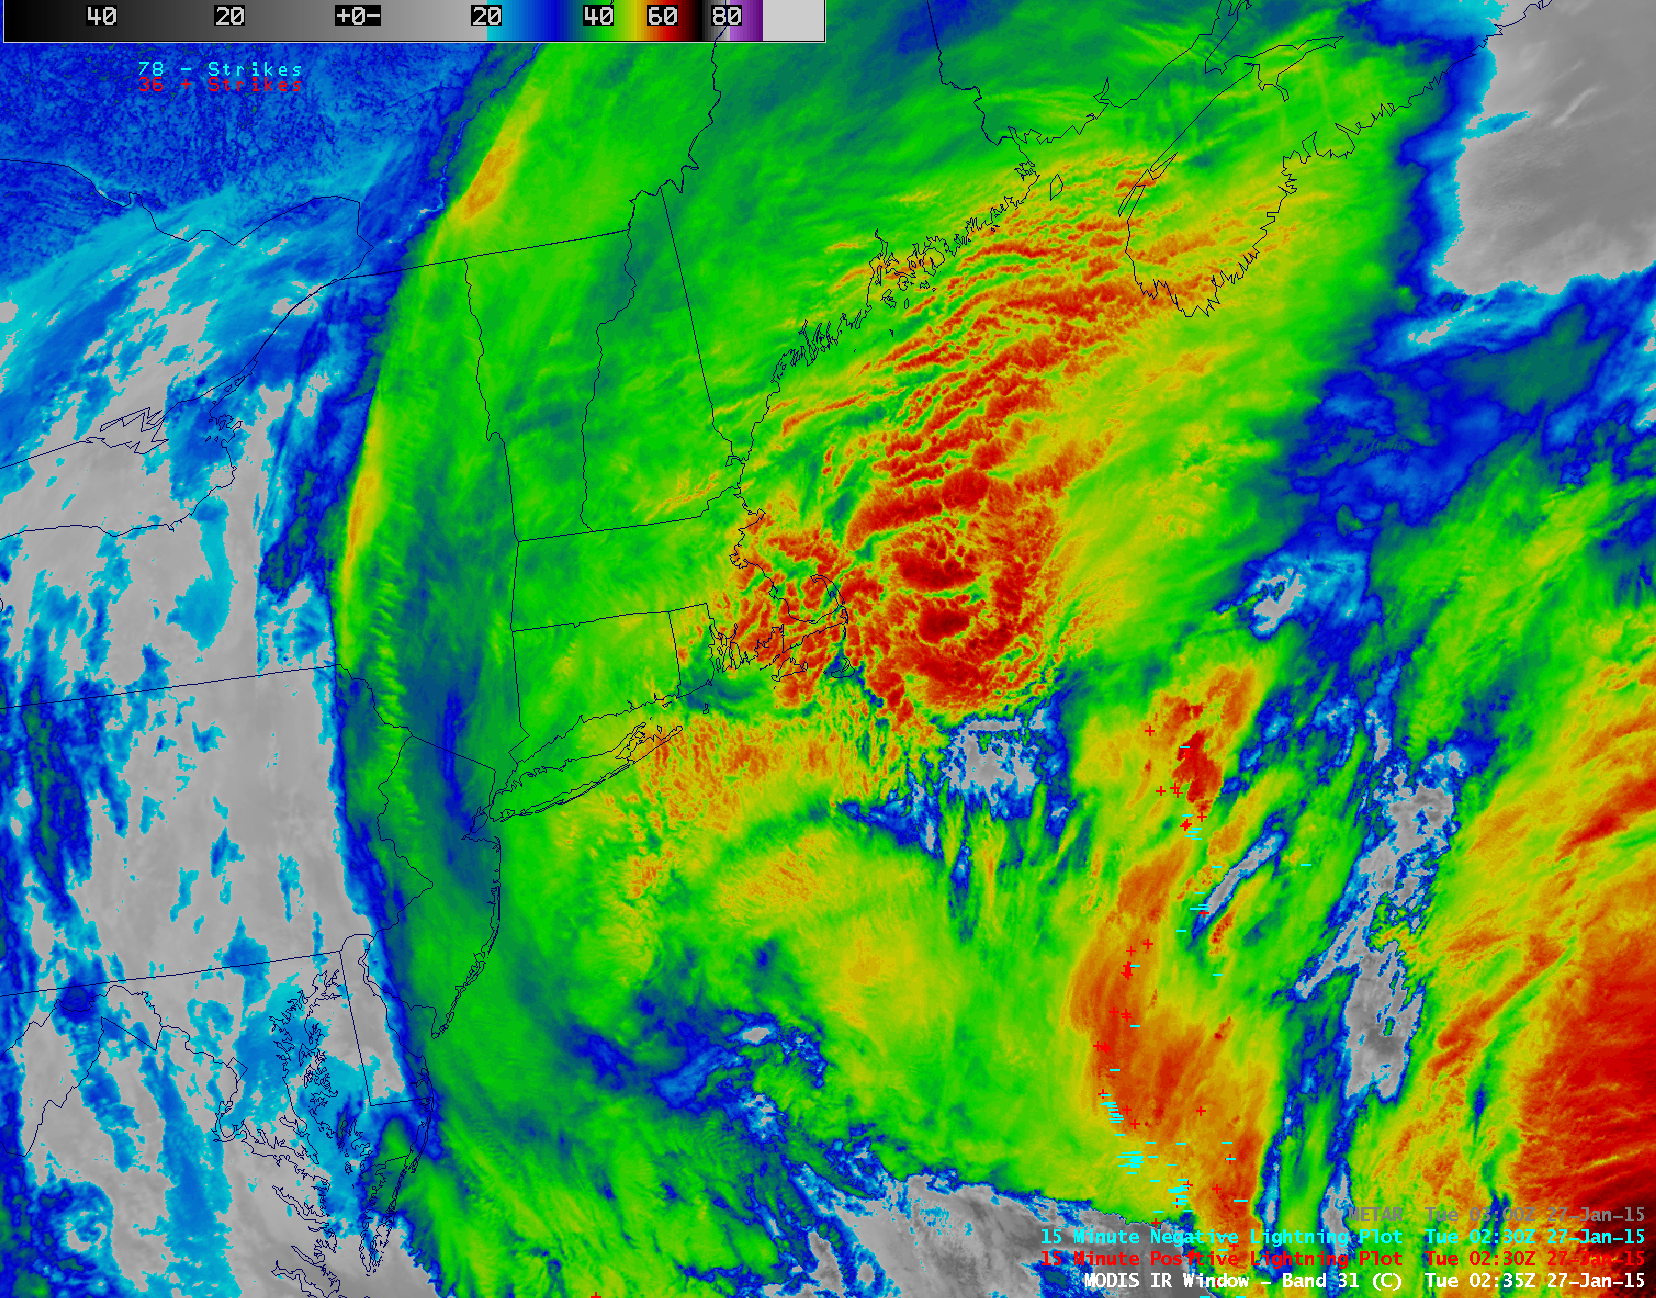 MODIS 11.0 µm IR channel image, with lighting strikes, METAR surface reports, and fixed buoy reports